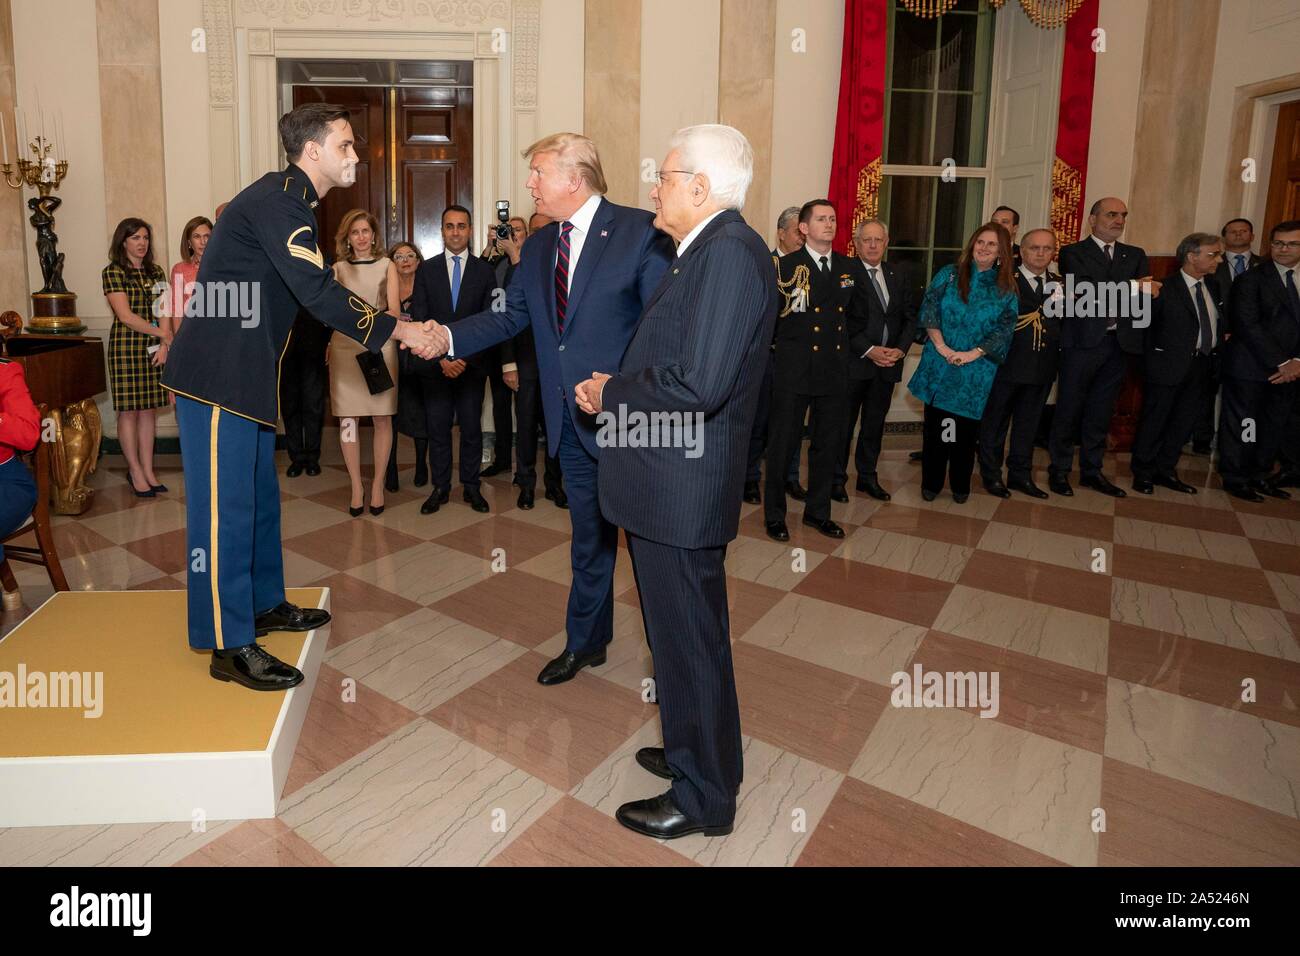 Washington, United States of America. 16 October, 2019. U.S President Donald Trump, center, thanks Staff Sgt. Christian Douglas Hoff, left, of the U.S. Army Choir for his performance during a reception in honor of Italian President Sergio Mattarella, right, in the Grand Foyer of the White House October 16, 2019 in Washington, DC. Credit: Tia Dufour/White House Photo/Alamy Live News Stock Photo